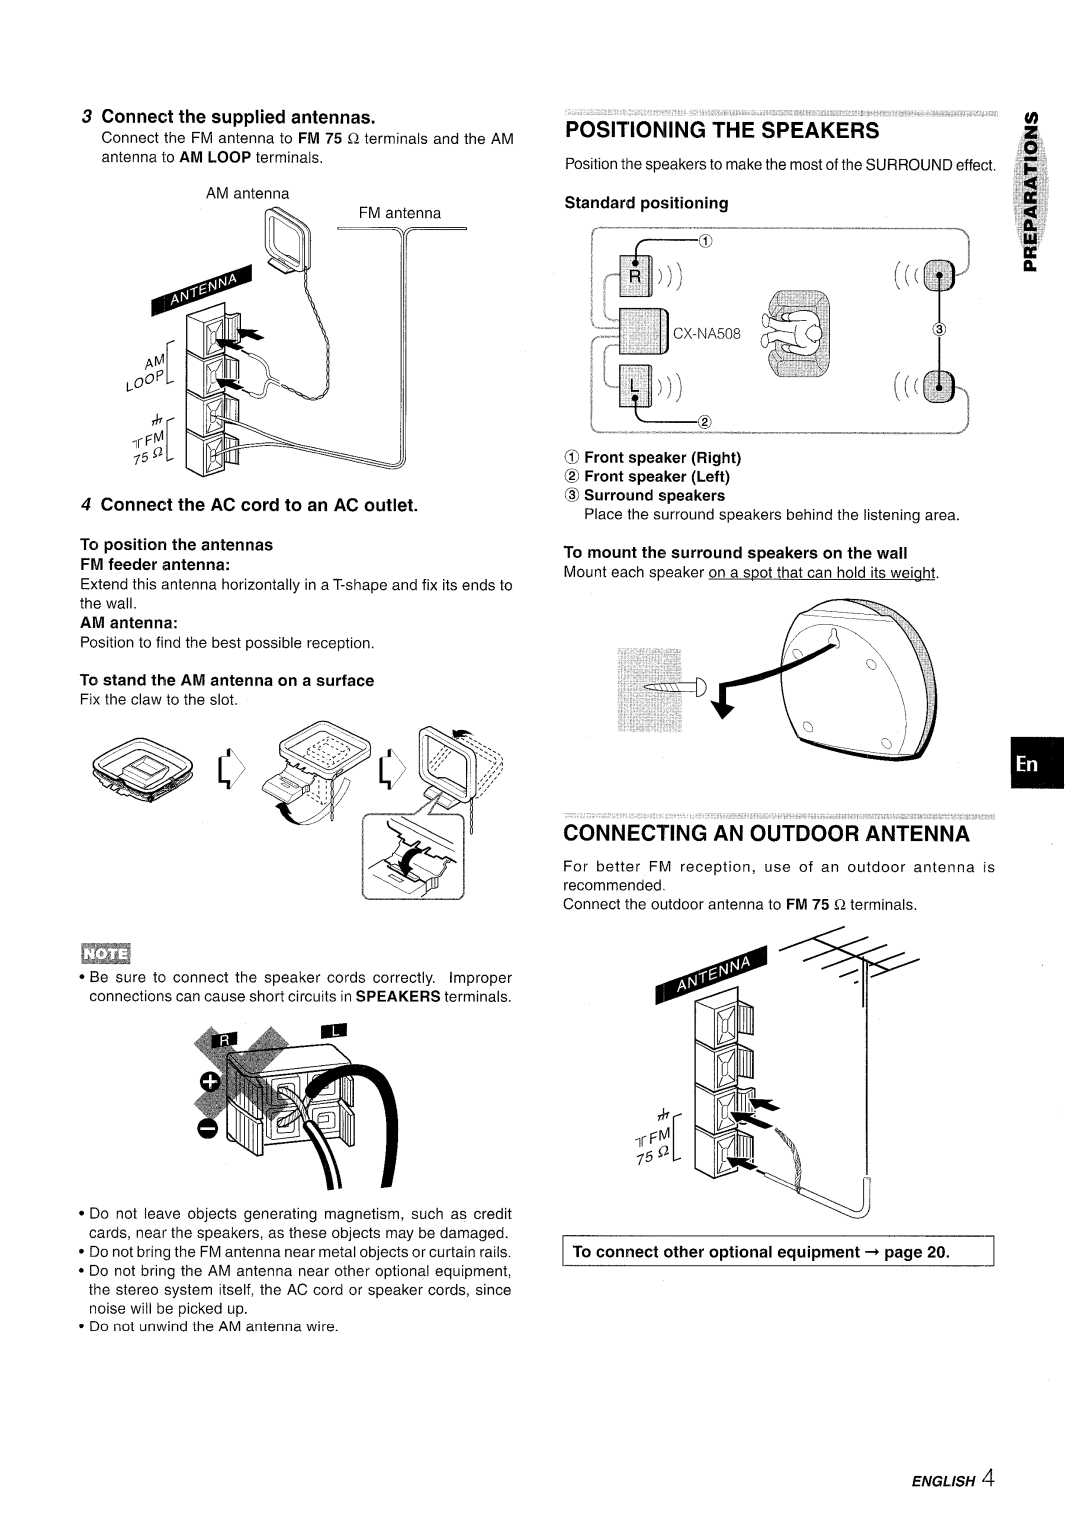 Aiwa NSX-A508 manual Onnecting An Outdoor Antenna, Connect the supplied antennas, Connect the AC cord to an AC outlet 